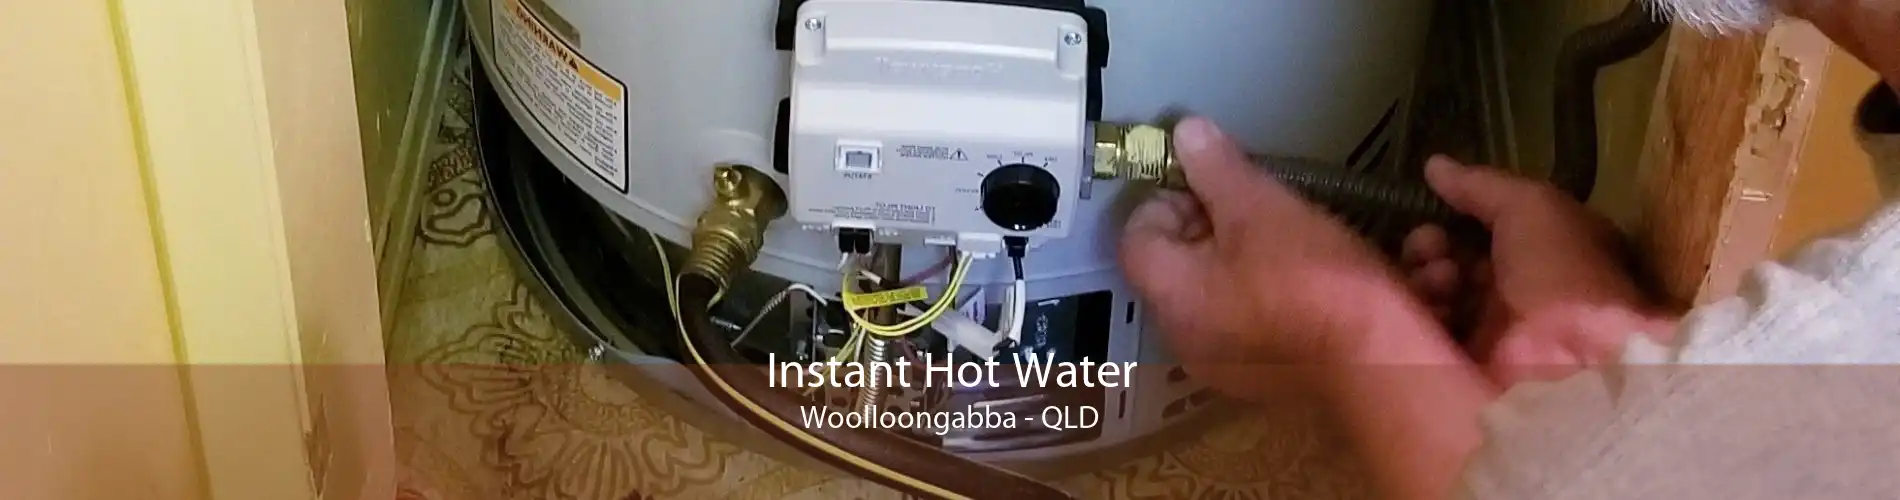 Instant Hot Water Woolloongabba - QLD